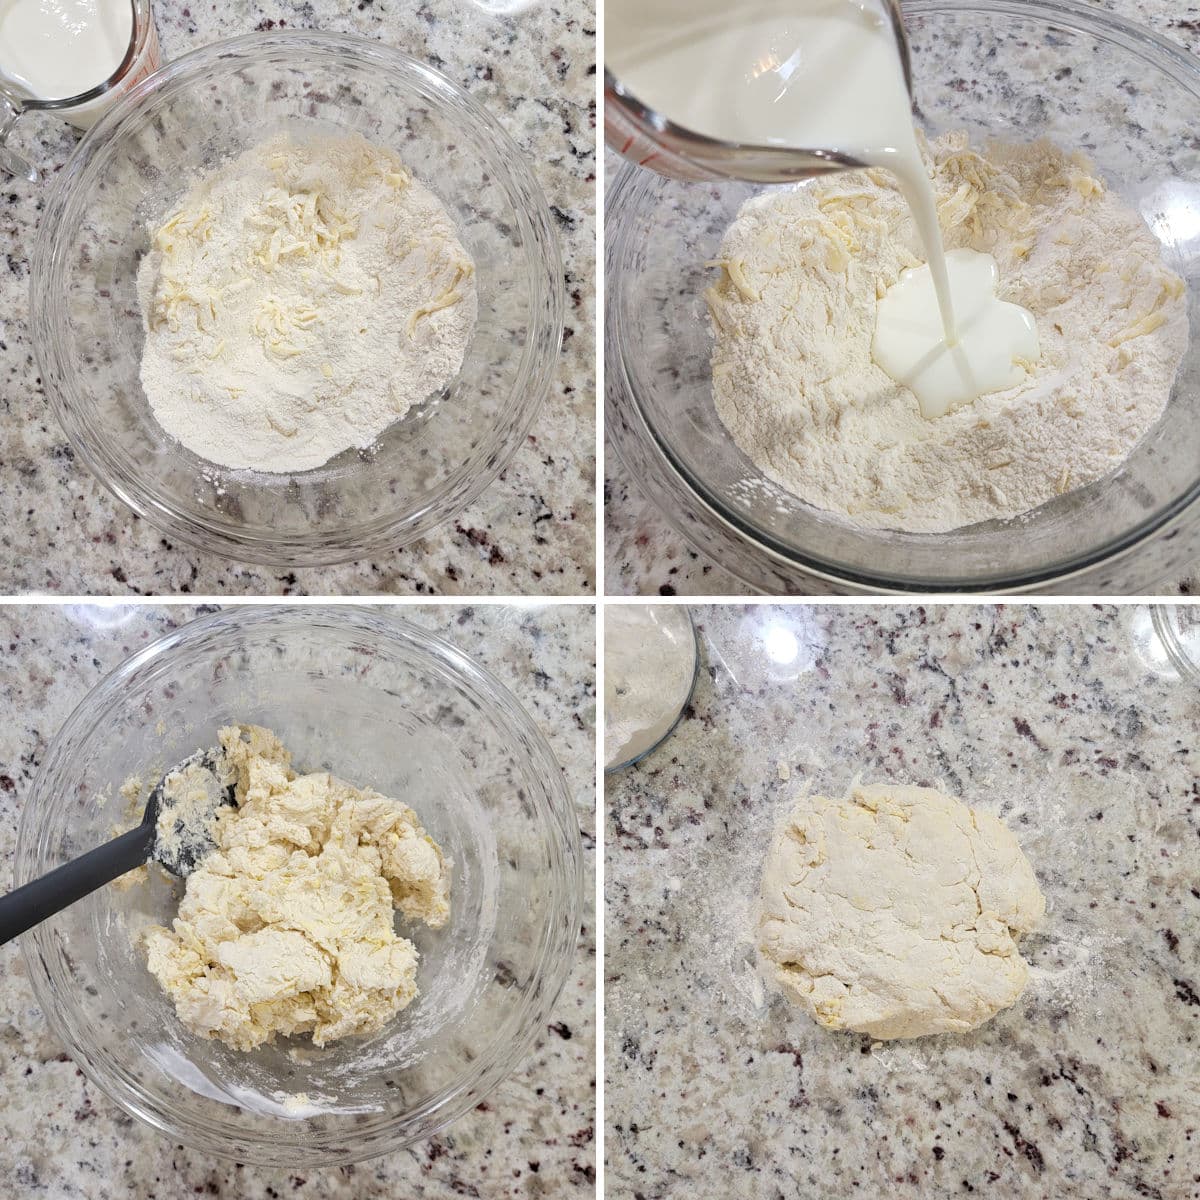 Mixing biscuit dough in a glass bowl.